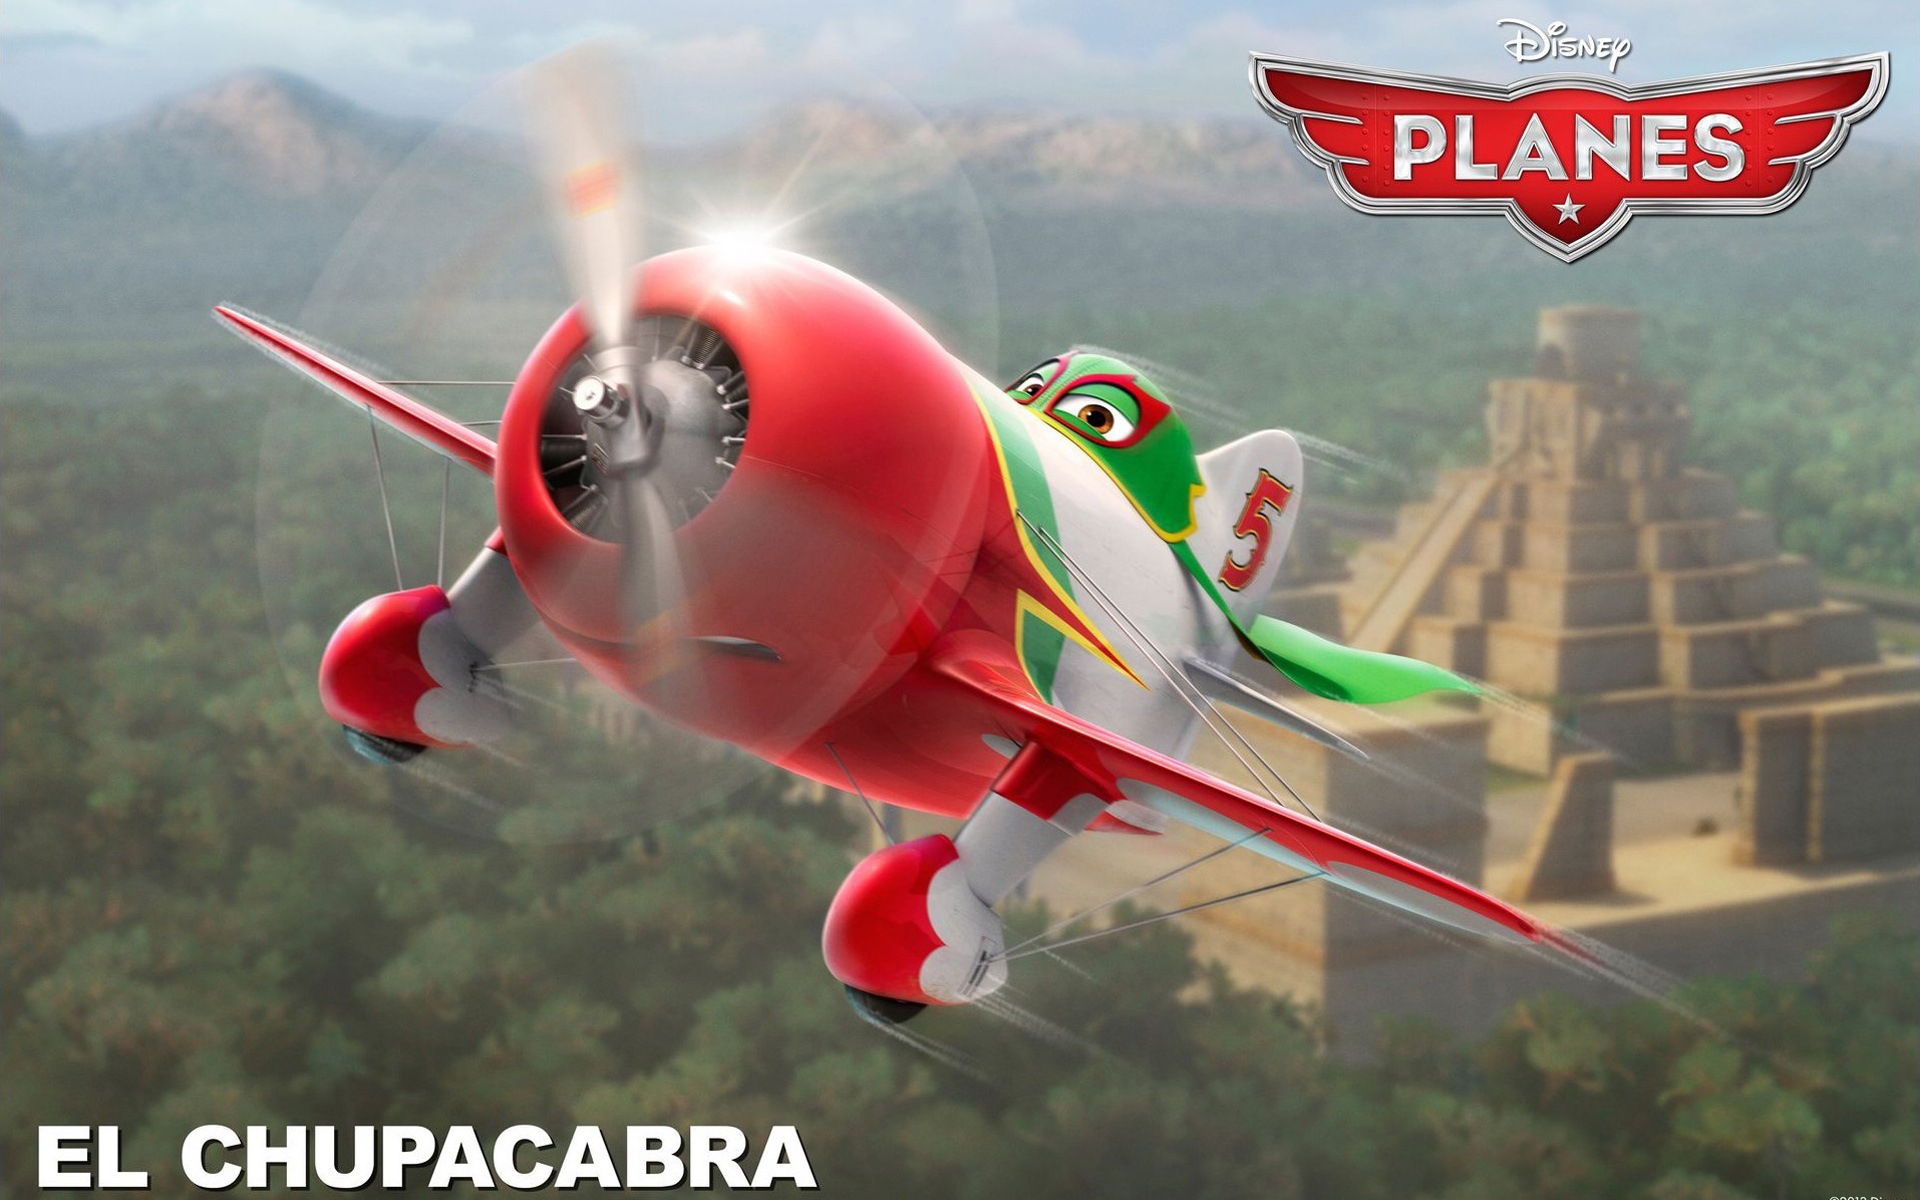 Planes 2013 HD wallpapers #17 - 1920x1200